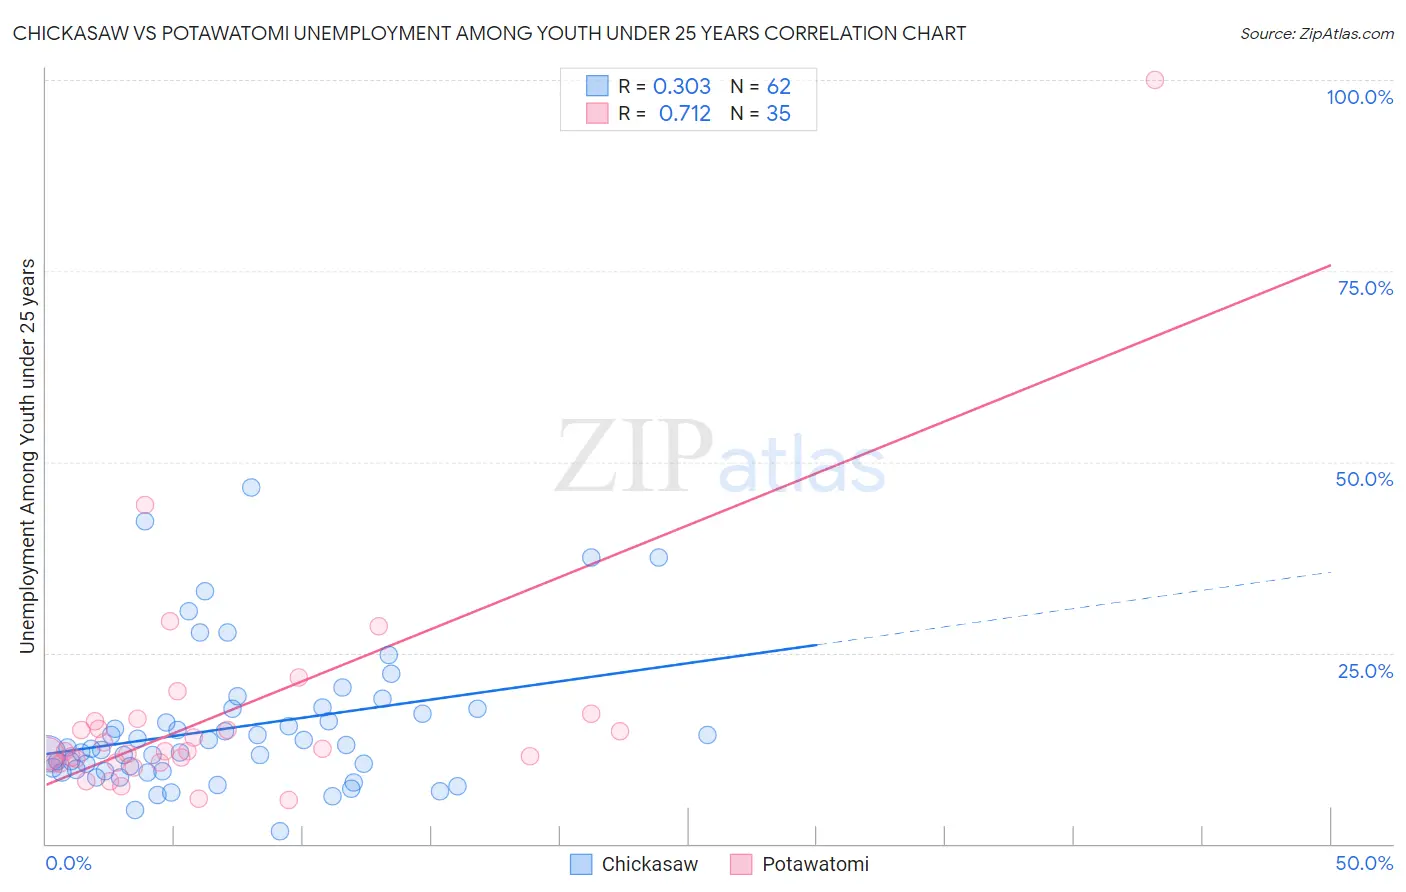 Chickasaw vs Potawatomi Unemployment Among Youth under 25 years